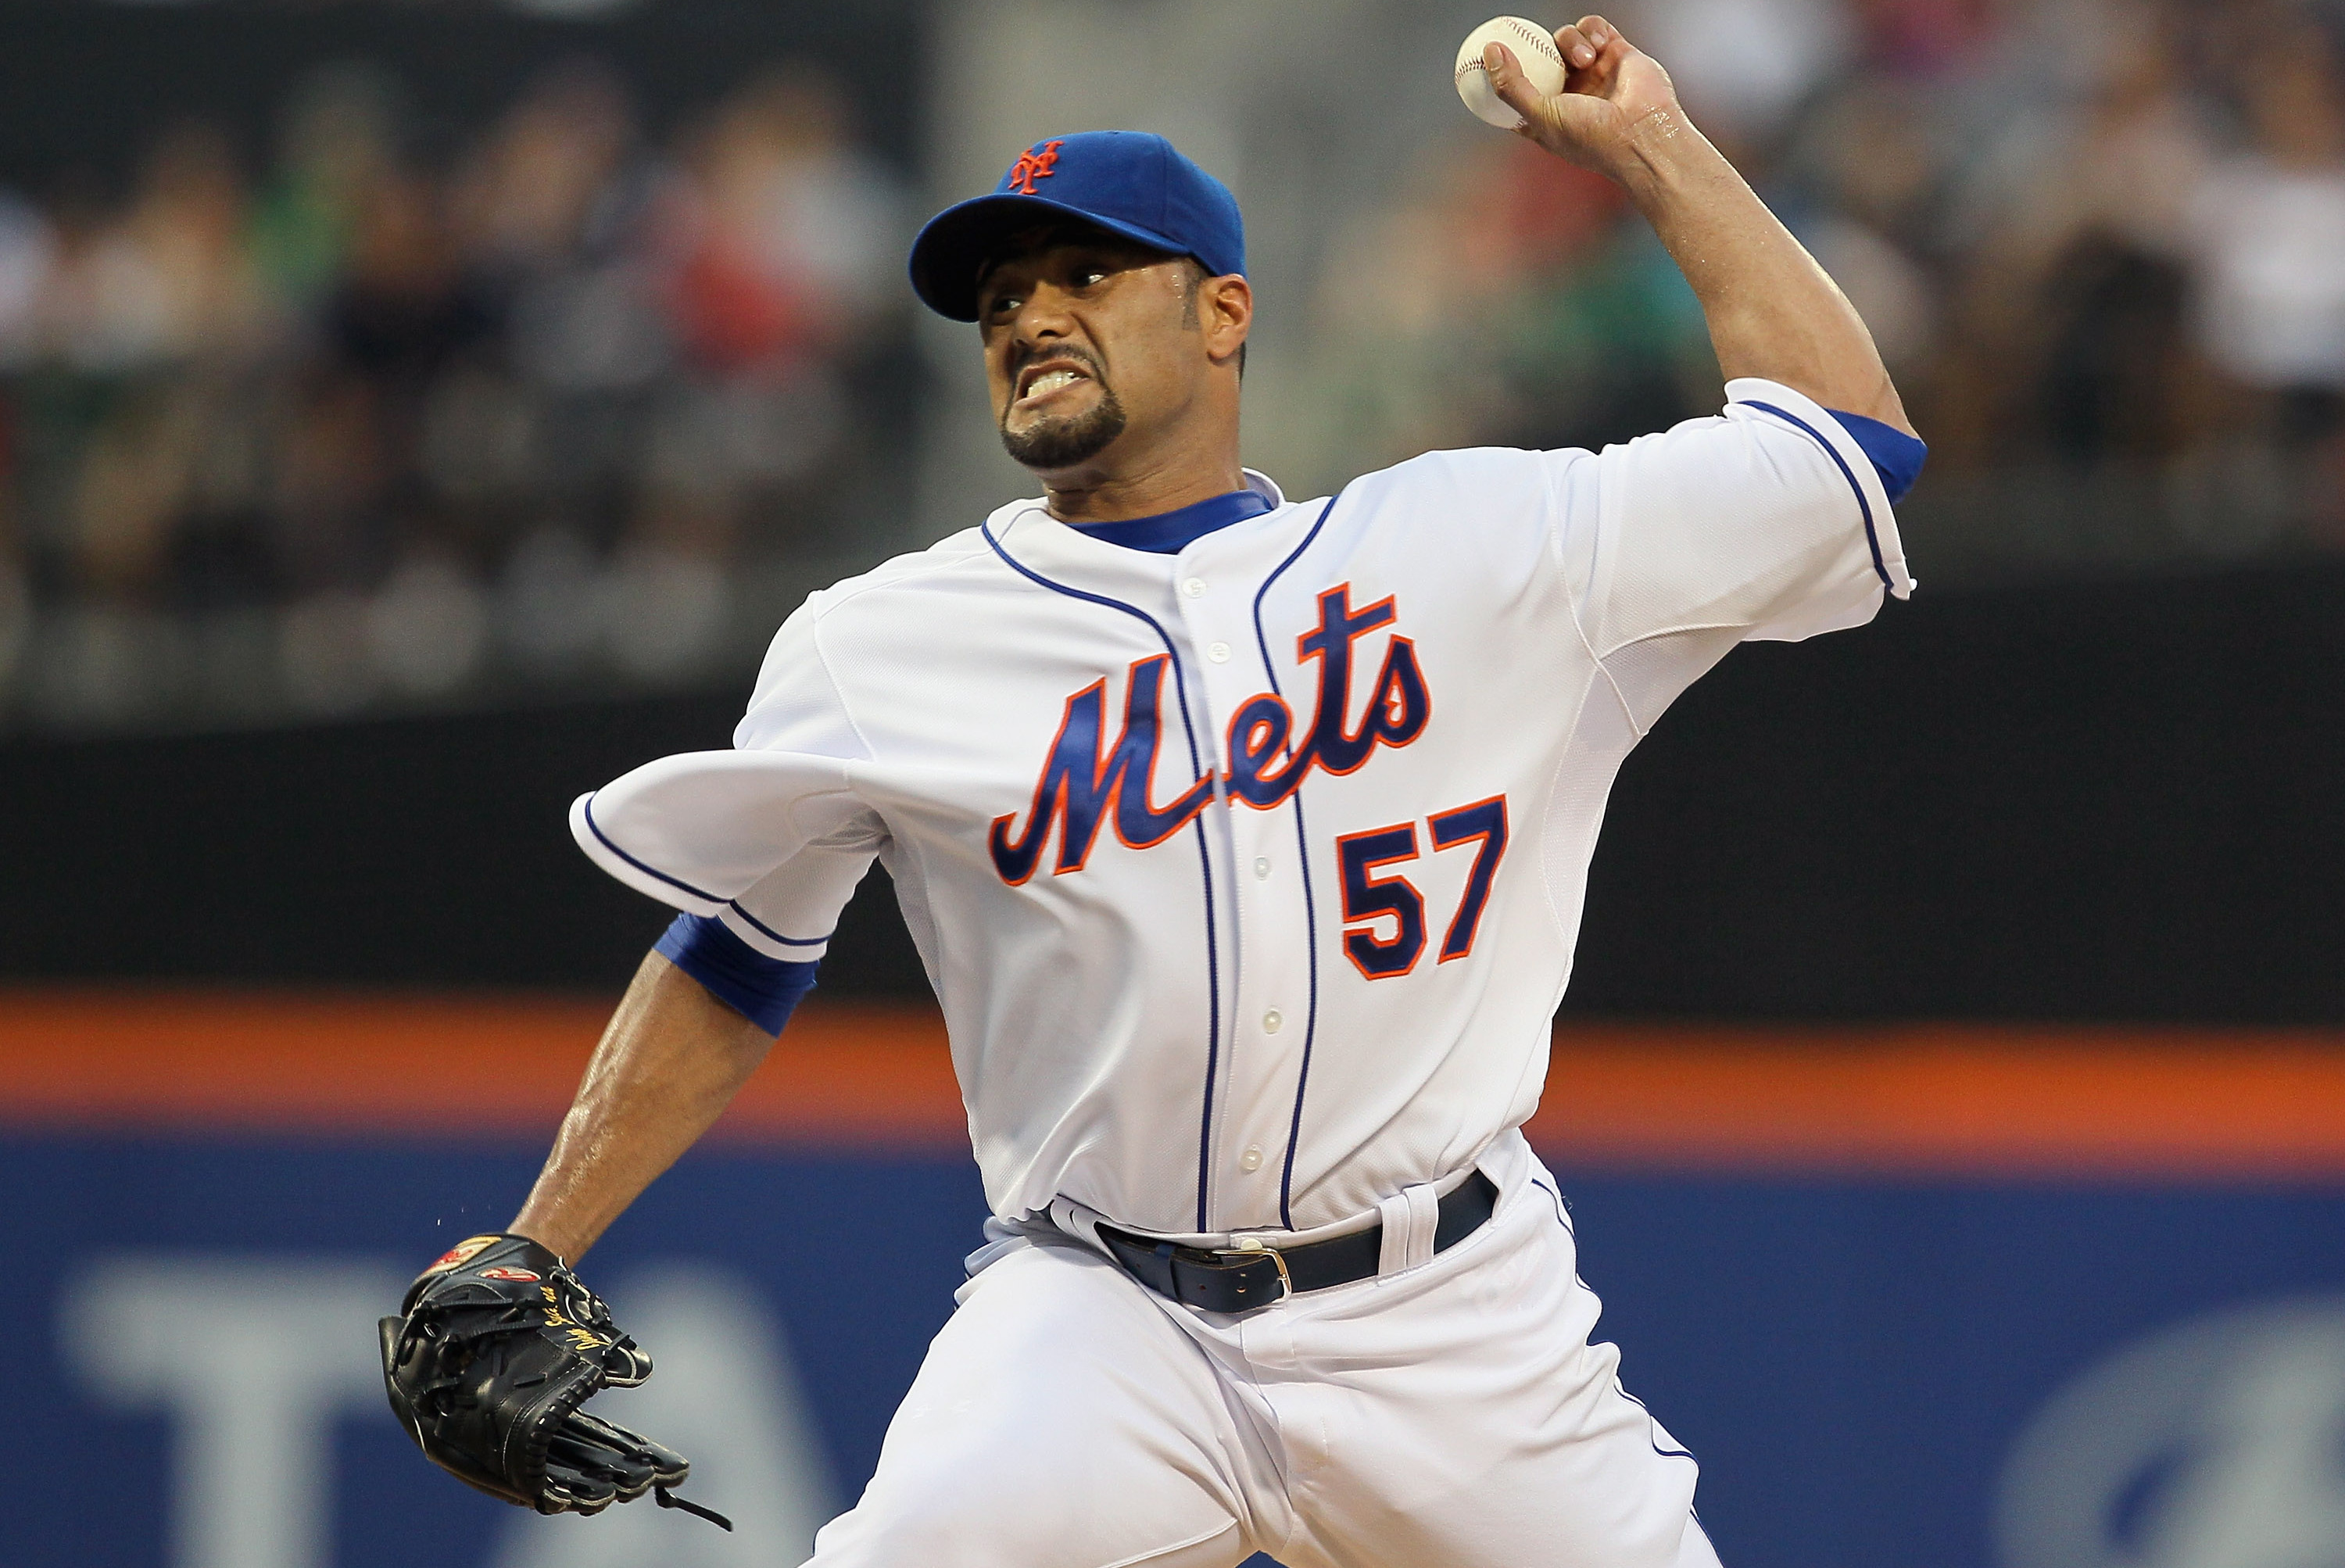 Santana will have shoulder surgery on Tuesday, ending Mets tenure